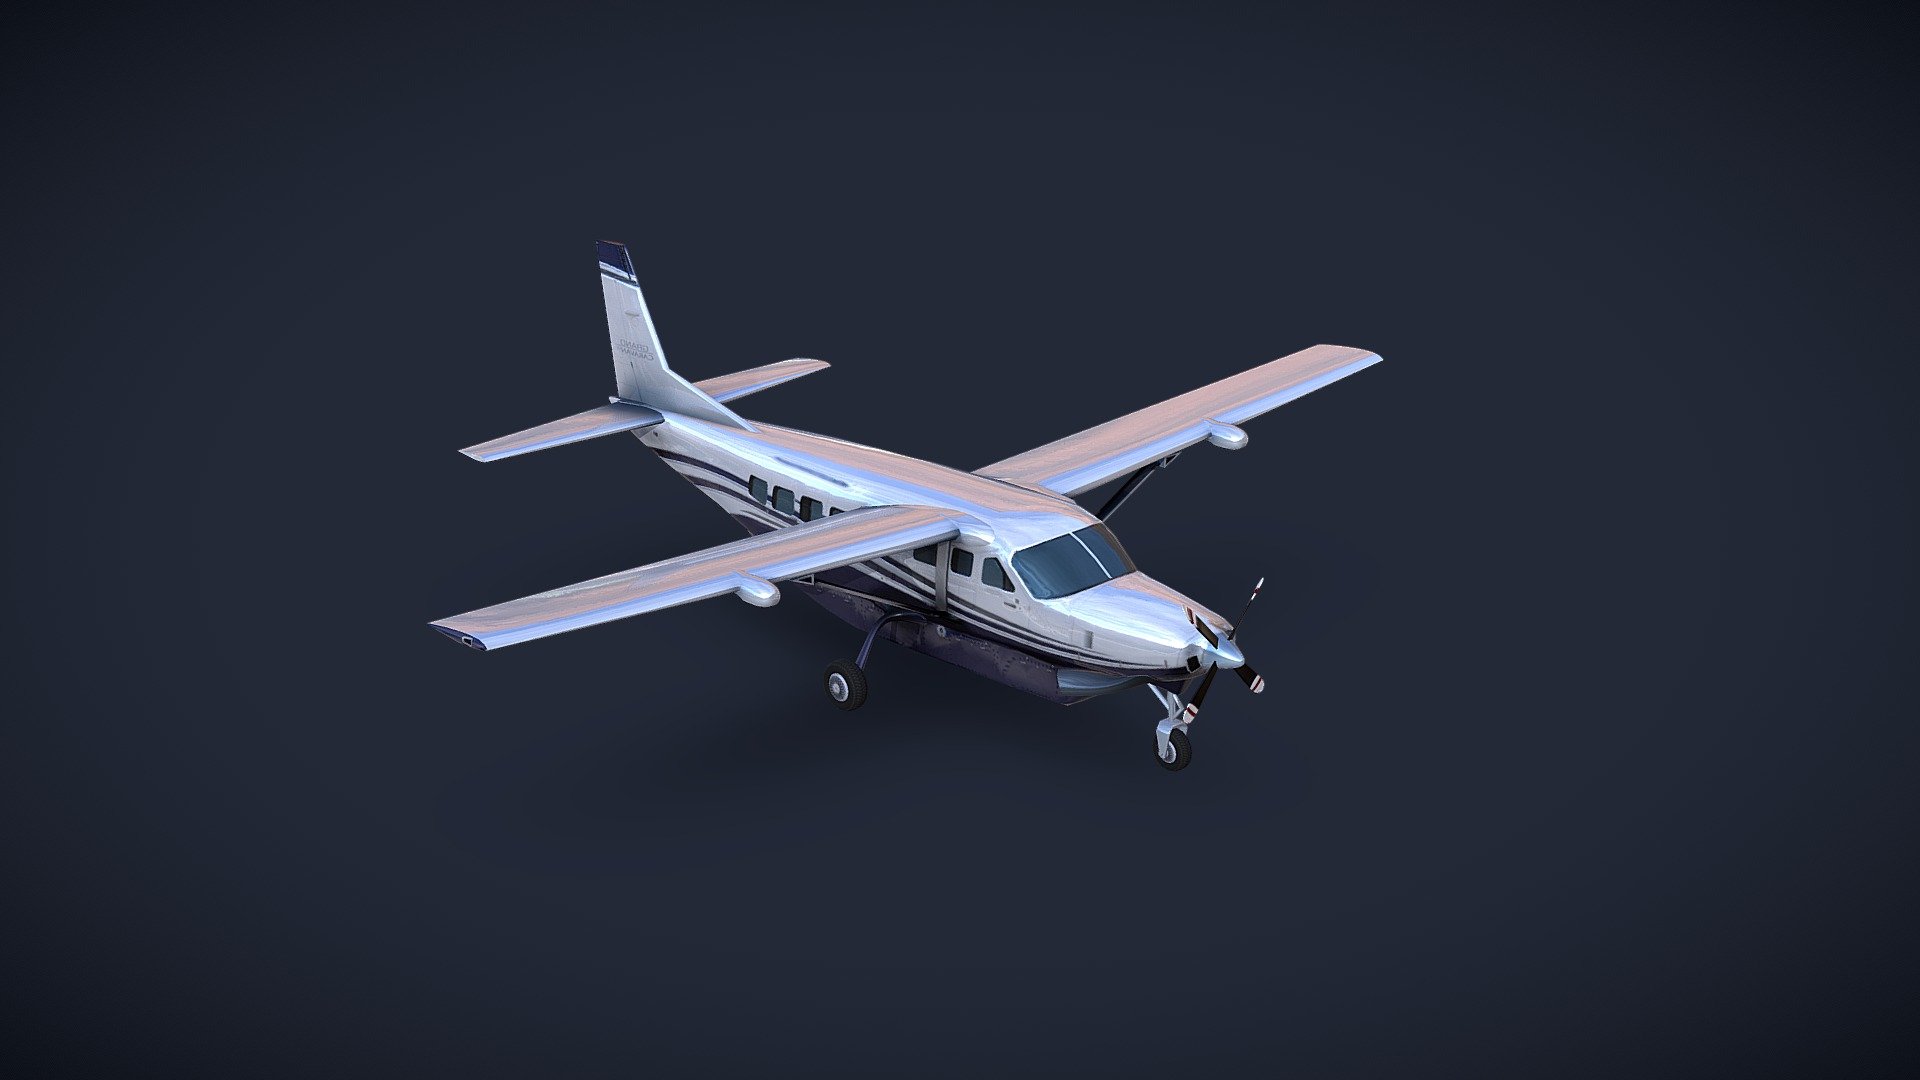 Cessna 208 Caravan is Unity PBR low-poly 3d model ready for Virtual Reality (VR) 
Single Material ,PBR shaders 3k polycount

Unity Package Ready games and other real-time apps. 
3D max And FBX ready 

SPECS 
- Model is set of separated Objects easy to custum 
- Model Has real-world Scale and is centered at 0,0,0,


Preview images Realtime rendered 
All textures Optimized 4K 
Mesh file Optimized fbx 200kbyte

Texture dimensions: 
- 4k (diffuse and Normal &amp; AO ) - Cessna 208 Caravan Low-poly VR PBR - Buy Royalty Free 3D model by Mass (@masood3d) 3d model